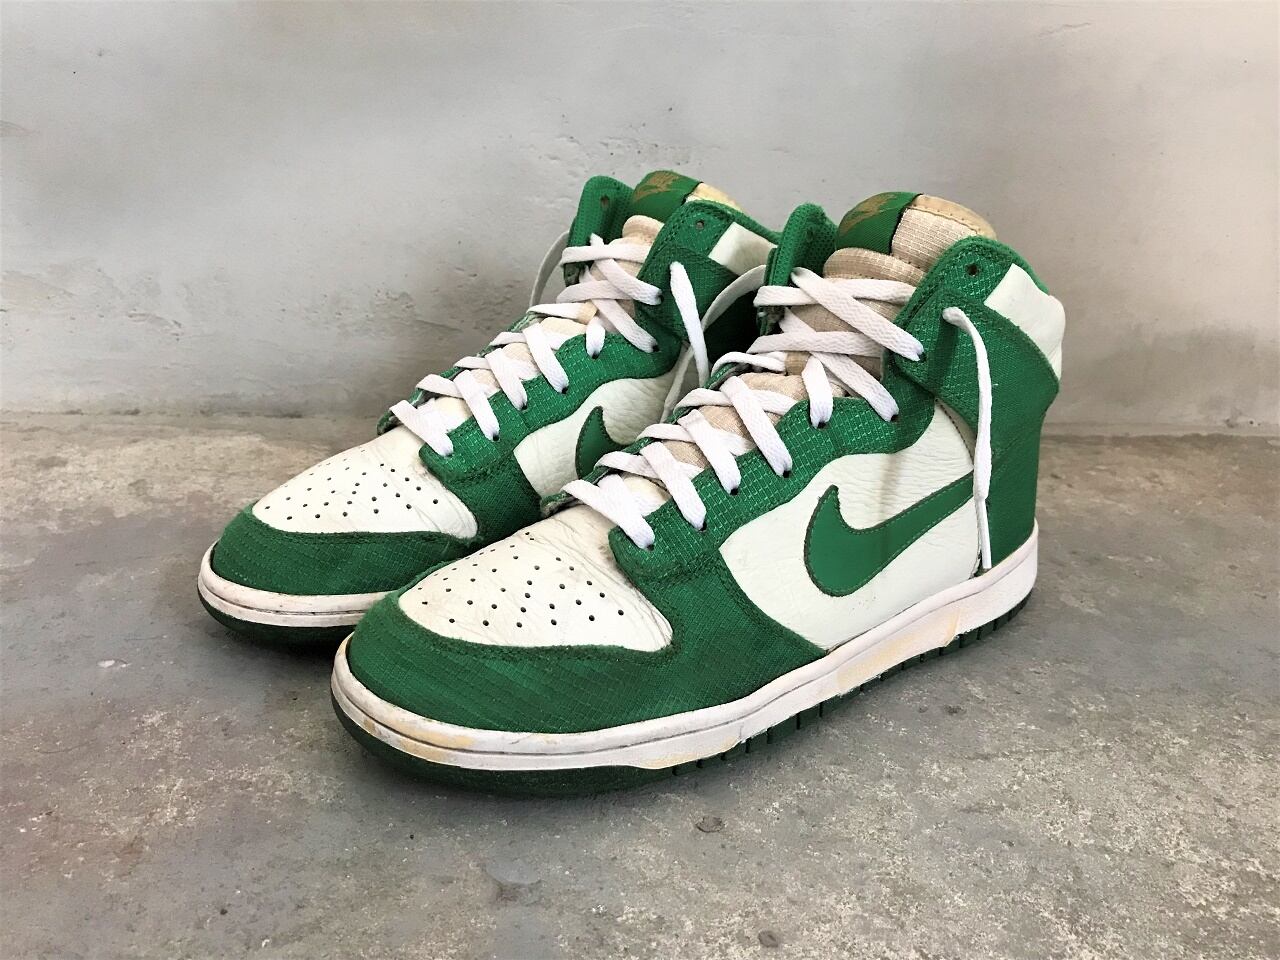 2010 NIKE DUNK HIGH SAIL/LUCKY GREEN | AFTER DARK powered by BASE